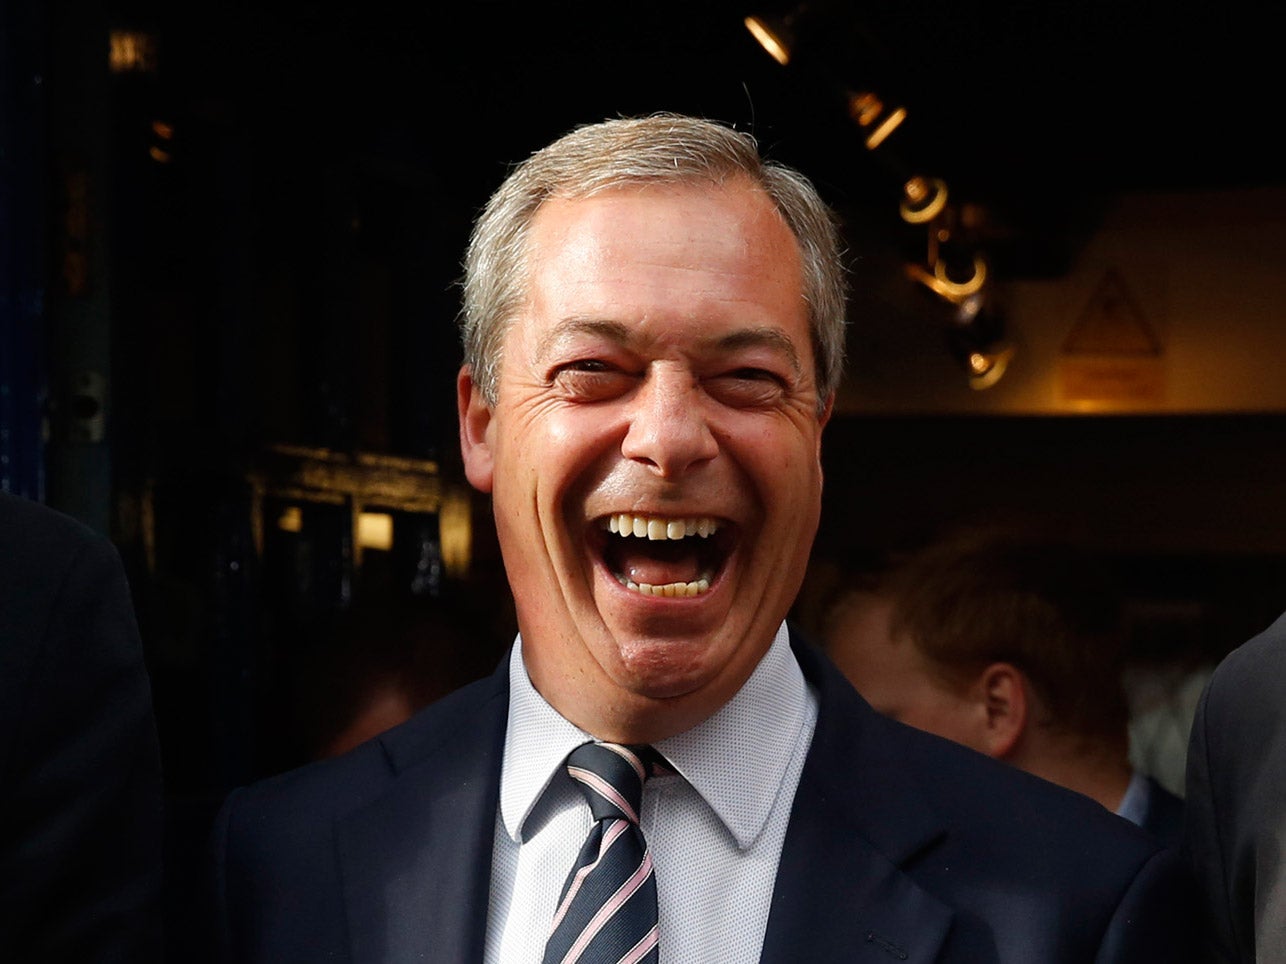 Bookies have already started paying out on a Ukip win in Rochester and Strood, before the election has even taken place